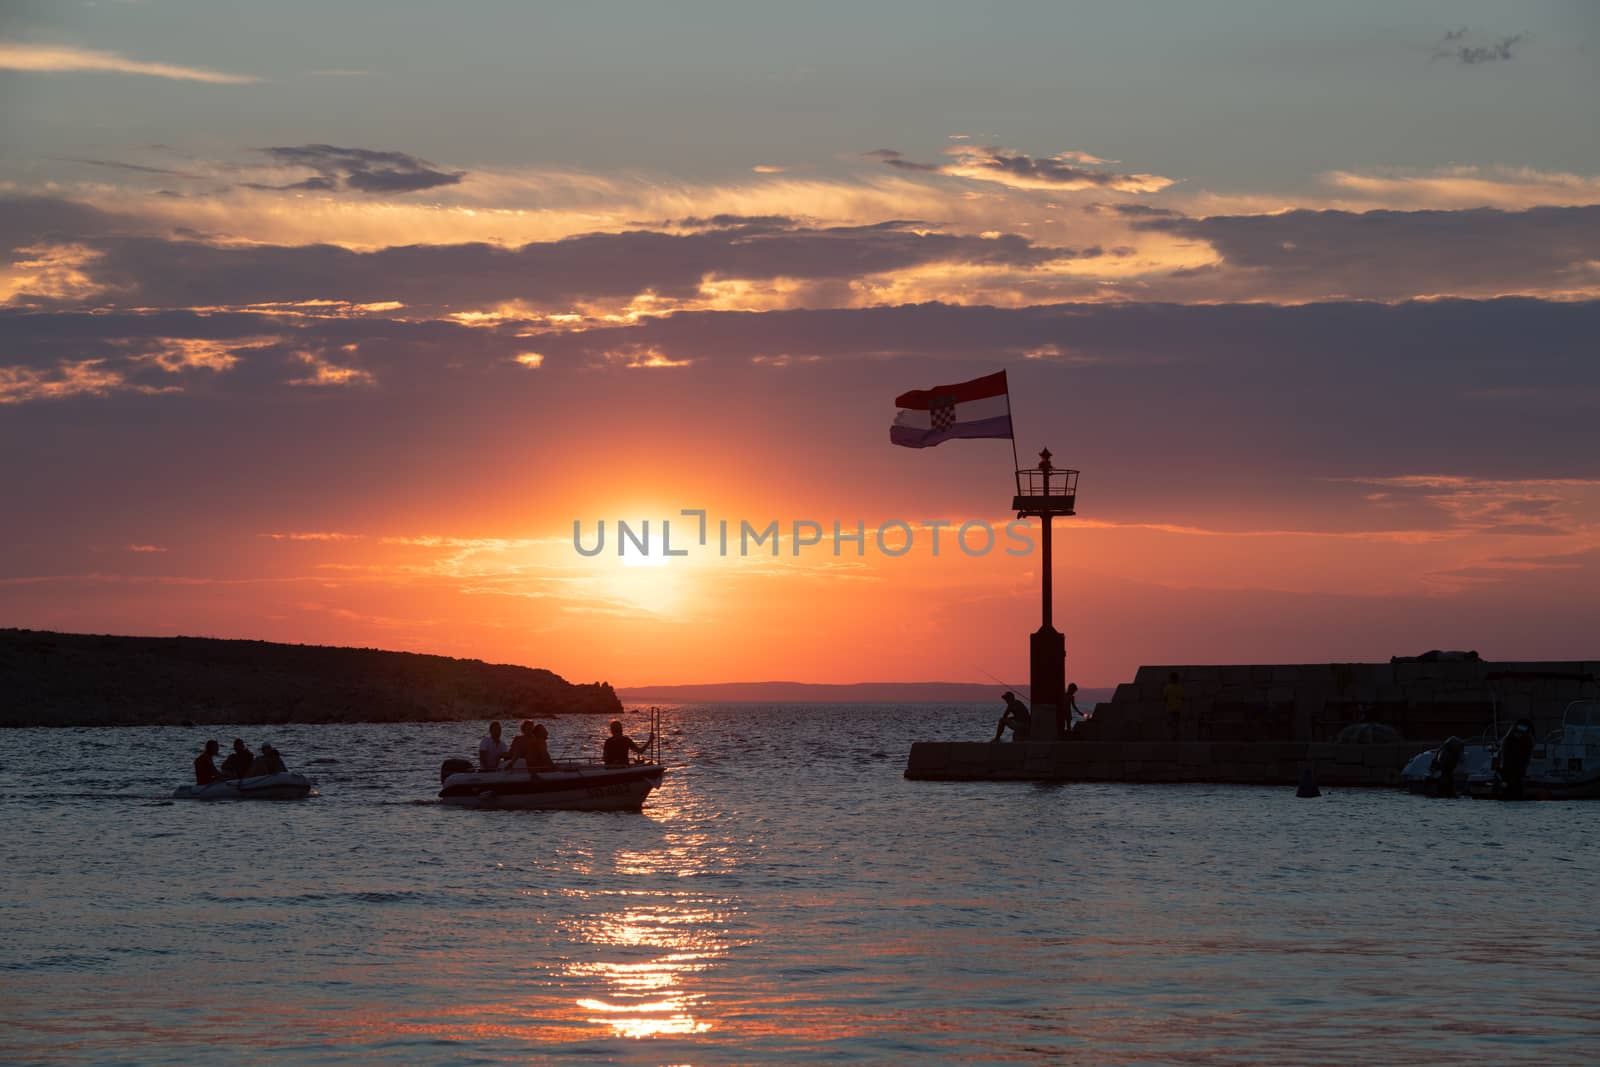 Croatian flag flying in wind at sunset in harbor, all people silhuetted and unrecognizable, small boats in front entering harbor